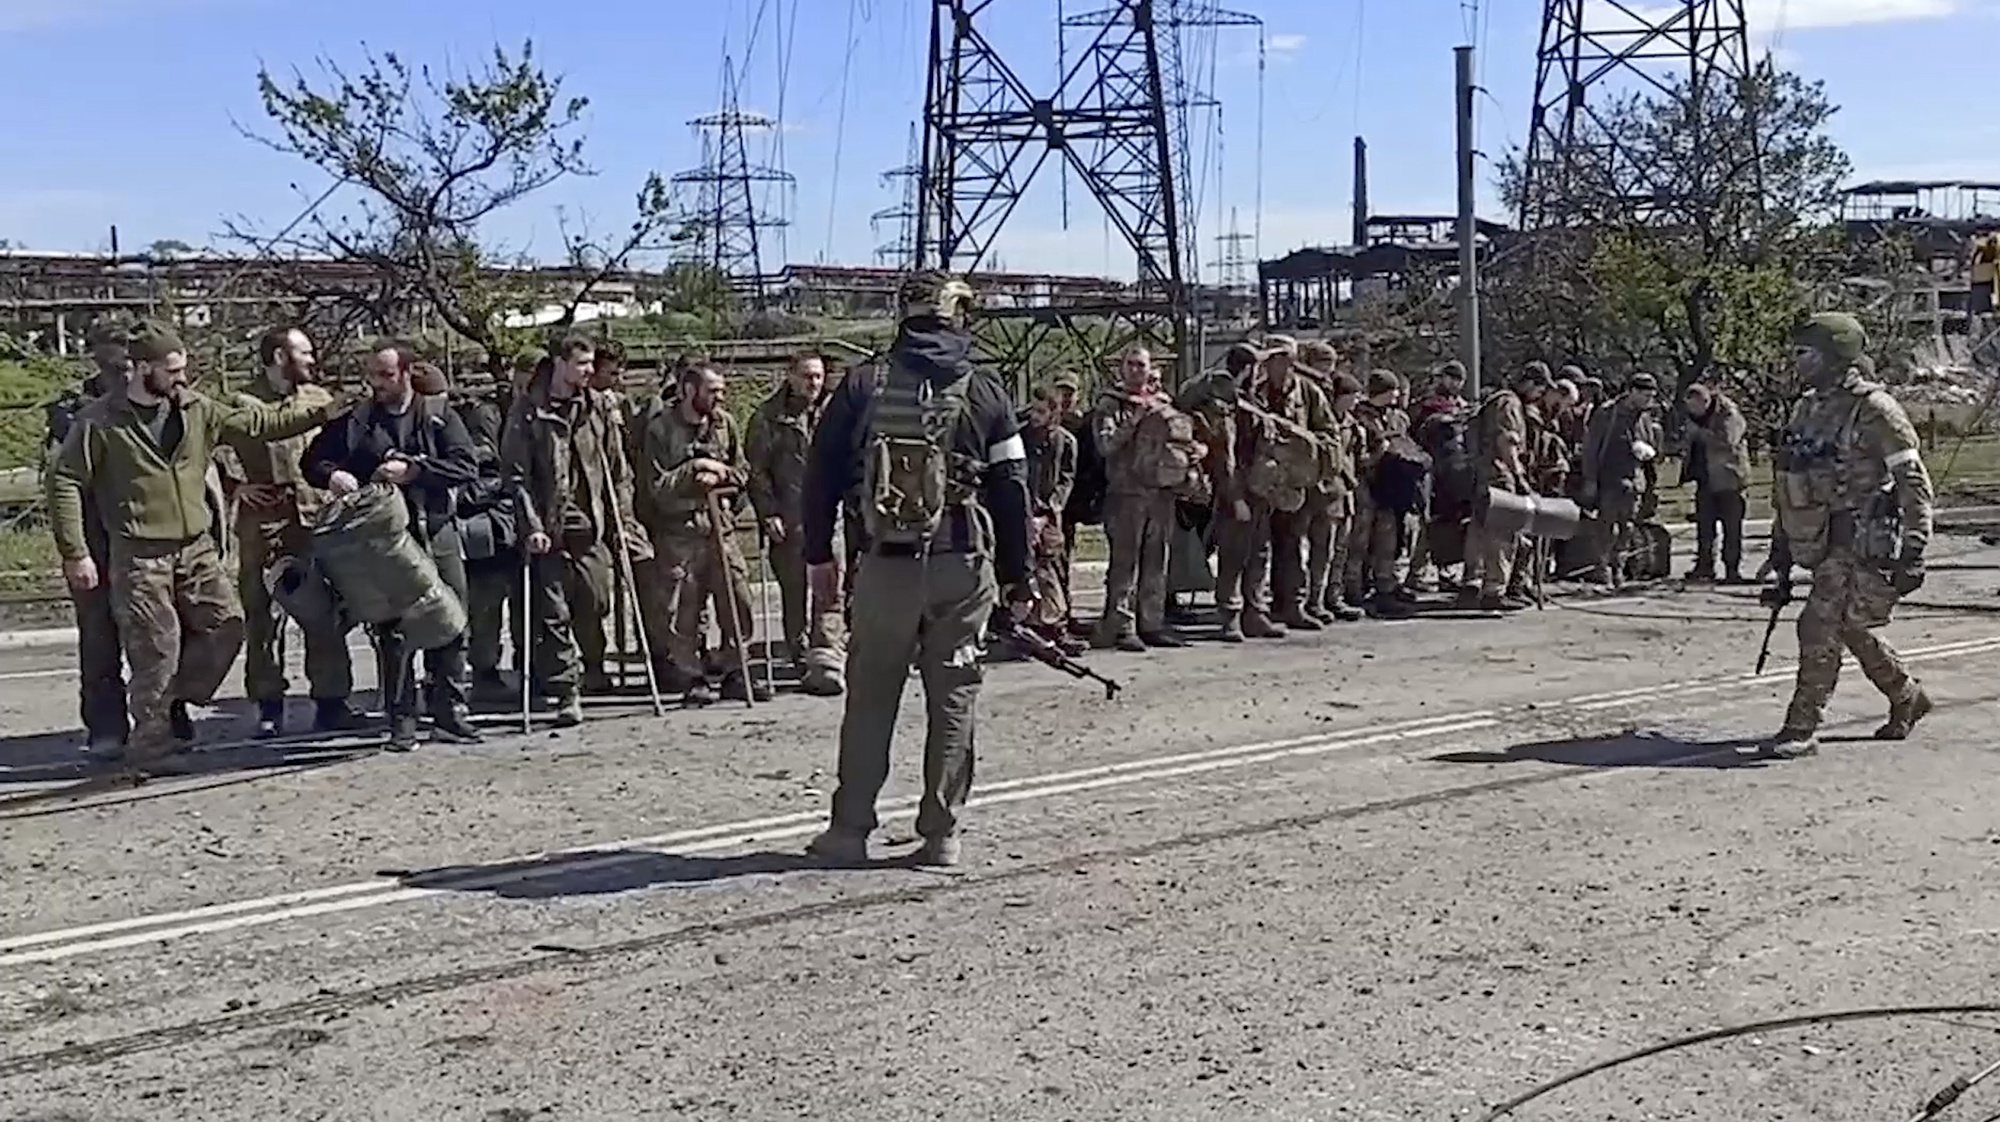 epa09956598 A still image taken from a handout video dated 17 Apirl 2022 and made available by the Russian Defence ministry press service on 18 April 2022 shows Ukrainian servicemen (facing) from the besieged Azovstal steel plant preparing to be evacuated, Mariupol, Ukraine, 17 May 2022. A total of 265 Ukrainian militants, including 51 seriously wounded, have laid down arms and surrendered to Russian forces, the Russian Ministry of Defence said on 17 May 2022. Those in need of medical assistance were sent for treatment to a hospital in Novoazovsk, the ministry states further. Russian President Putin on 21 April 2022 ordered his Defence Minister to not storm but to blockade the plant where a number of Ukrainian fighters were holding out. On 24 February, Russian troops invaded Ukrainian territory starting a conflict that has provoked destruction and a humanitarian crisis. According to the UNHCR, more than six million refugees have fled Ukraine, and a further 7.7 million people have been displaced internally within Ukraine since.  EPA/RUSSIAN DEFENCE MINISTRY PRESS SERVICE/HANDOUT HANDOUT HANDOUT EDITORIAL USE ONLY/NO SALES HANDOUT EDITORIAL USE ONLY/NO SALES